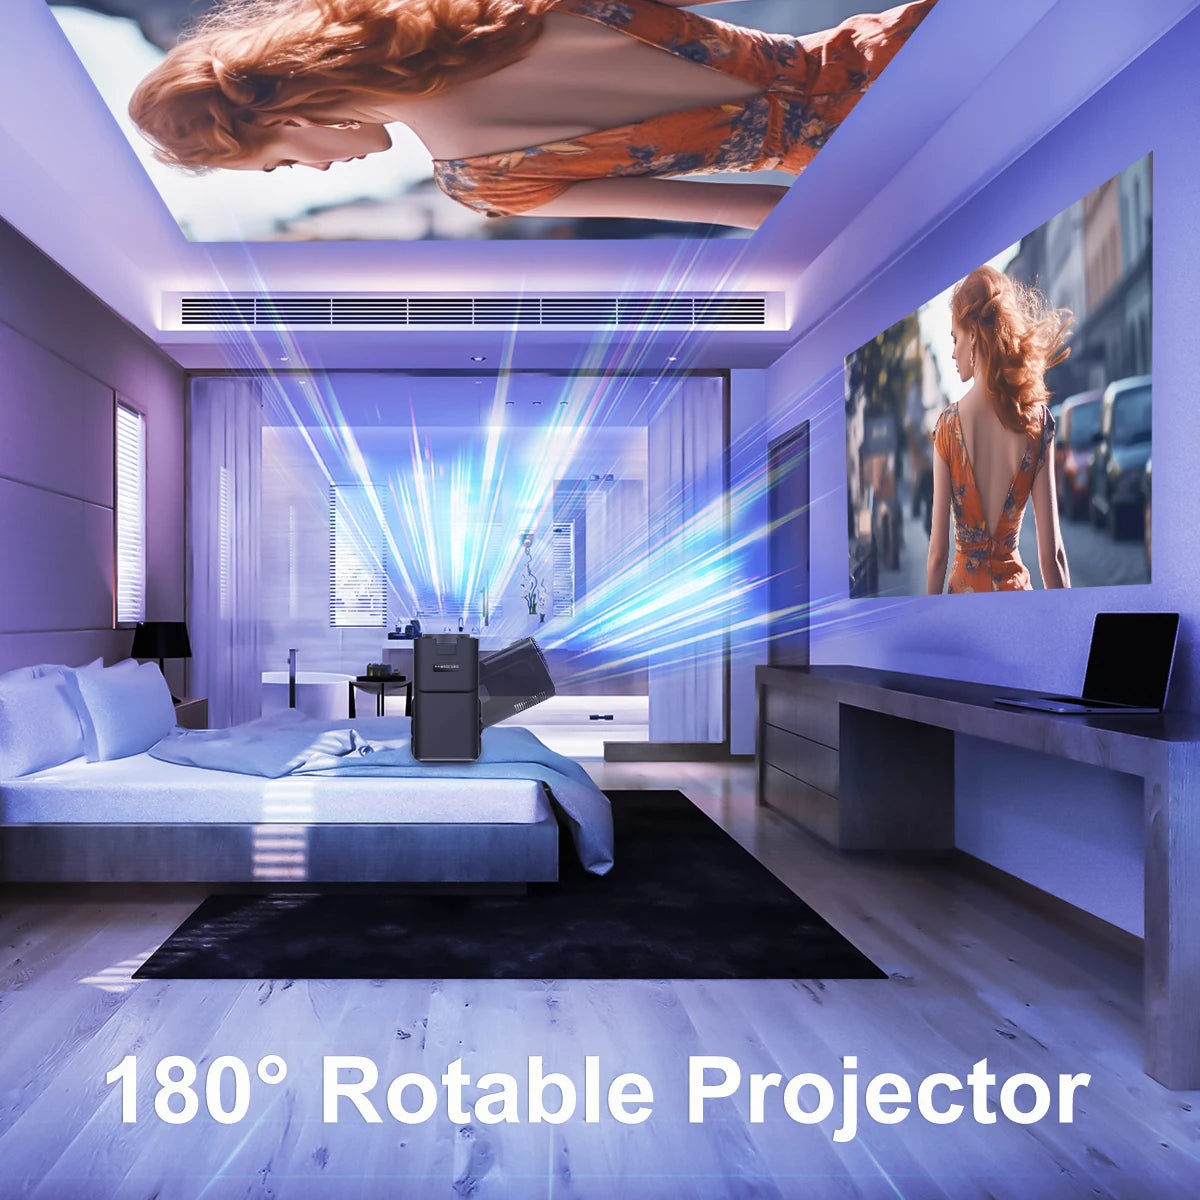 Magcubic 4K Android 11 Projector